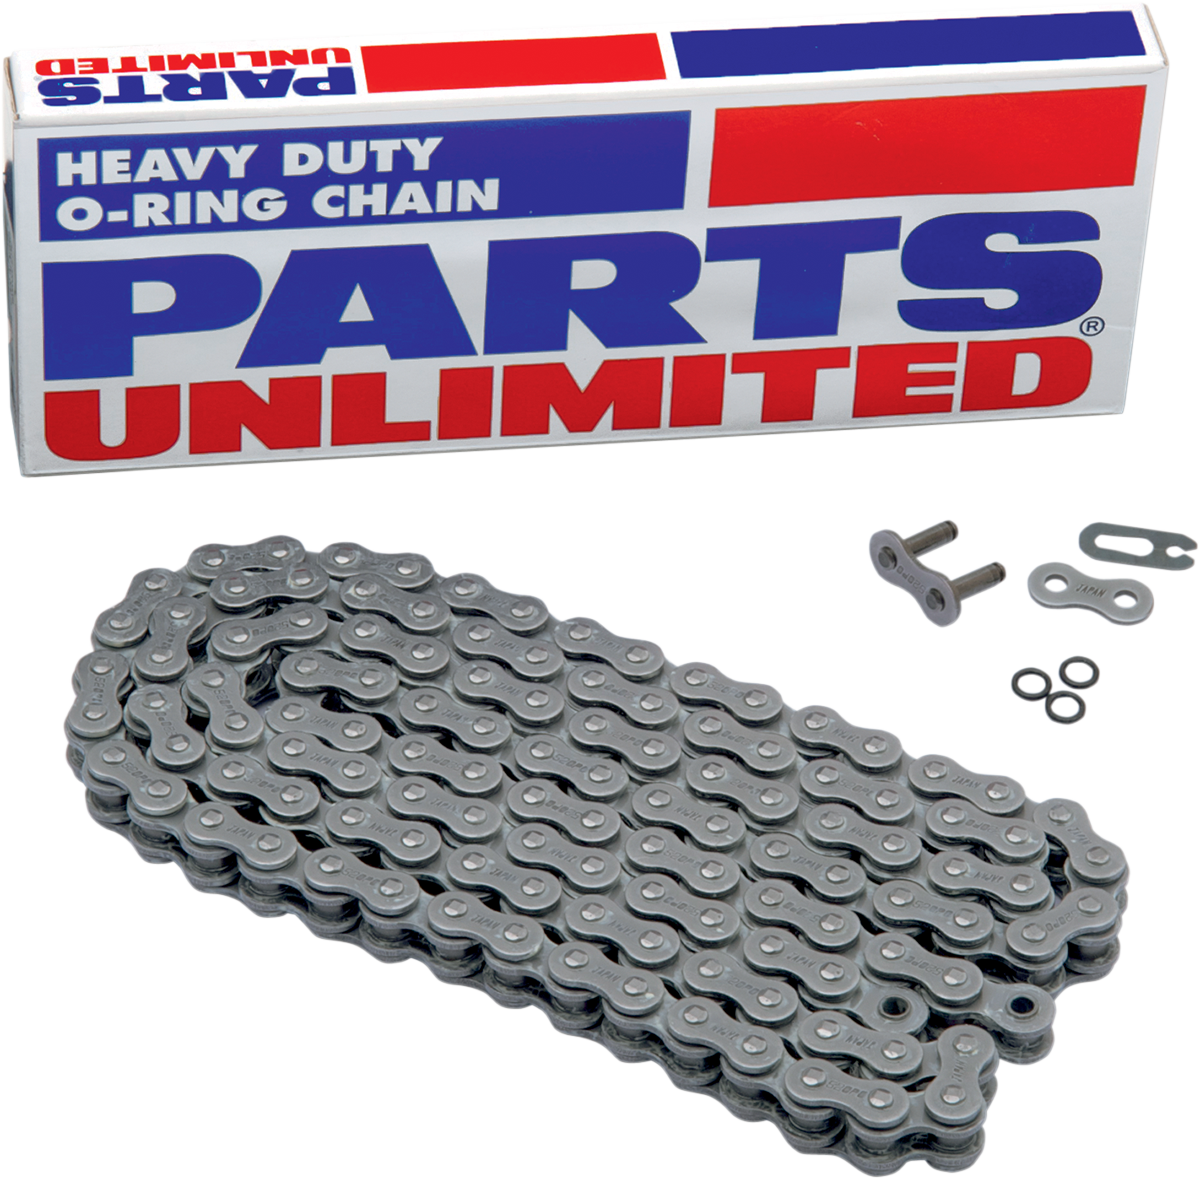 PARTS UNLIMITED-CHAIN MOTORCYCLE CHAIN CHAIN PU 520 O-RING X 82L